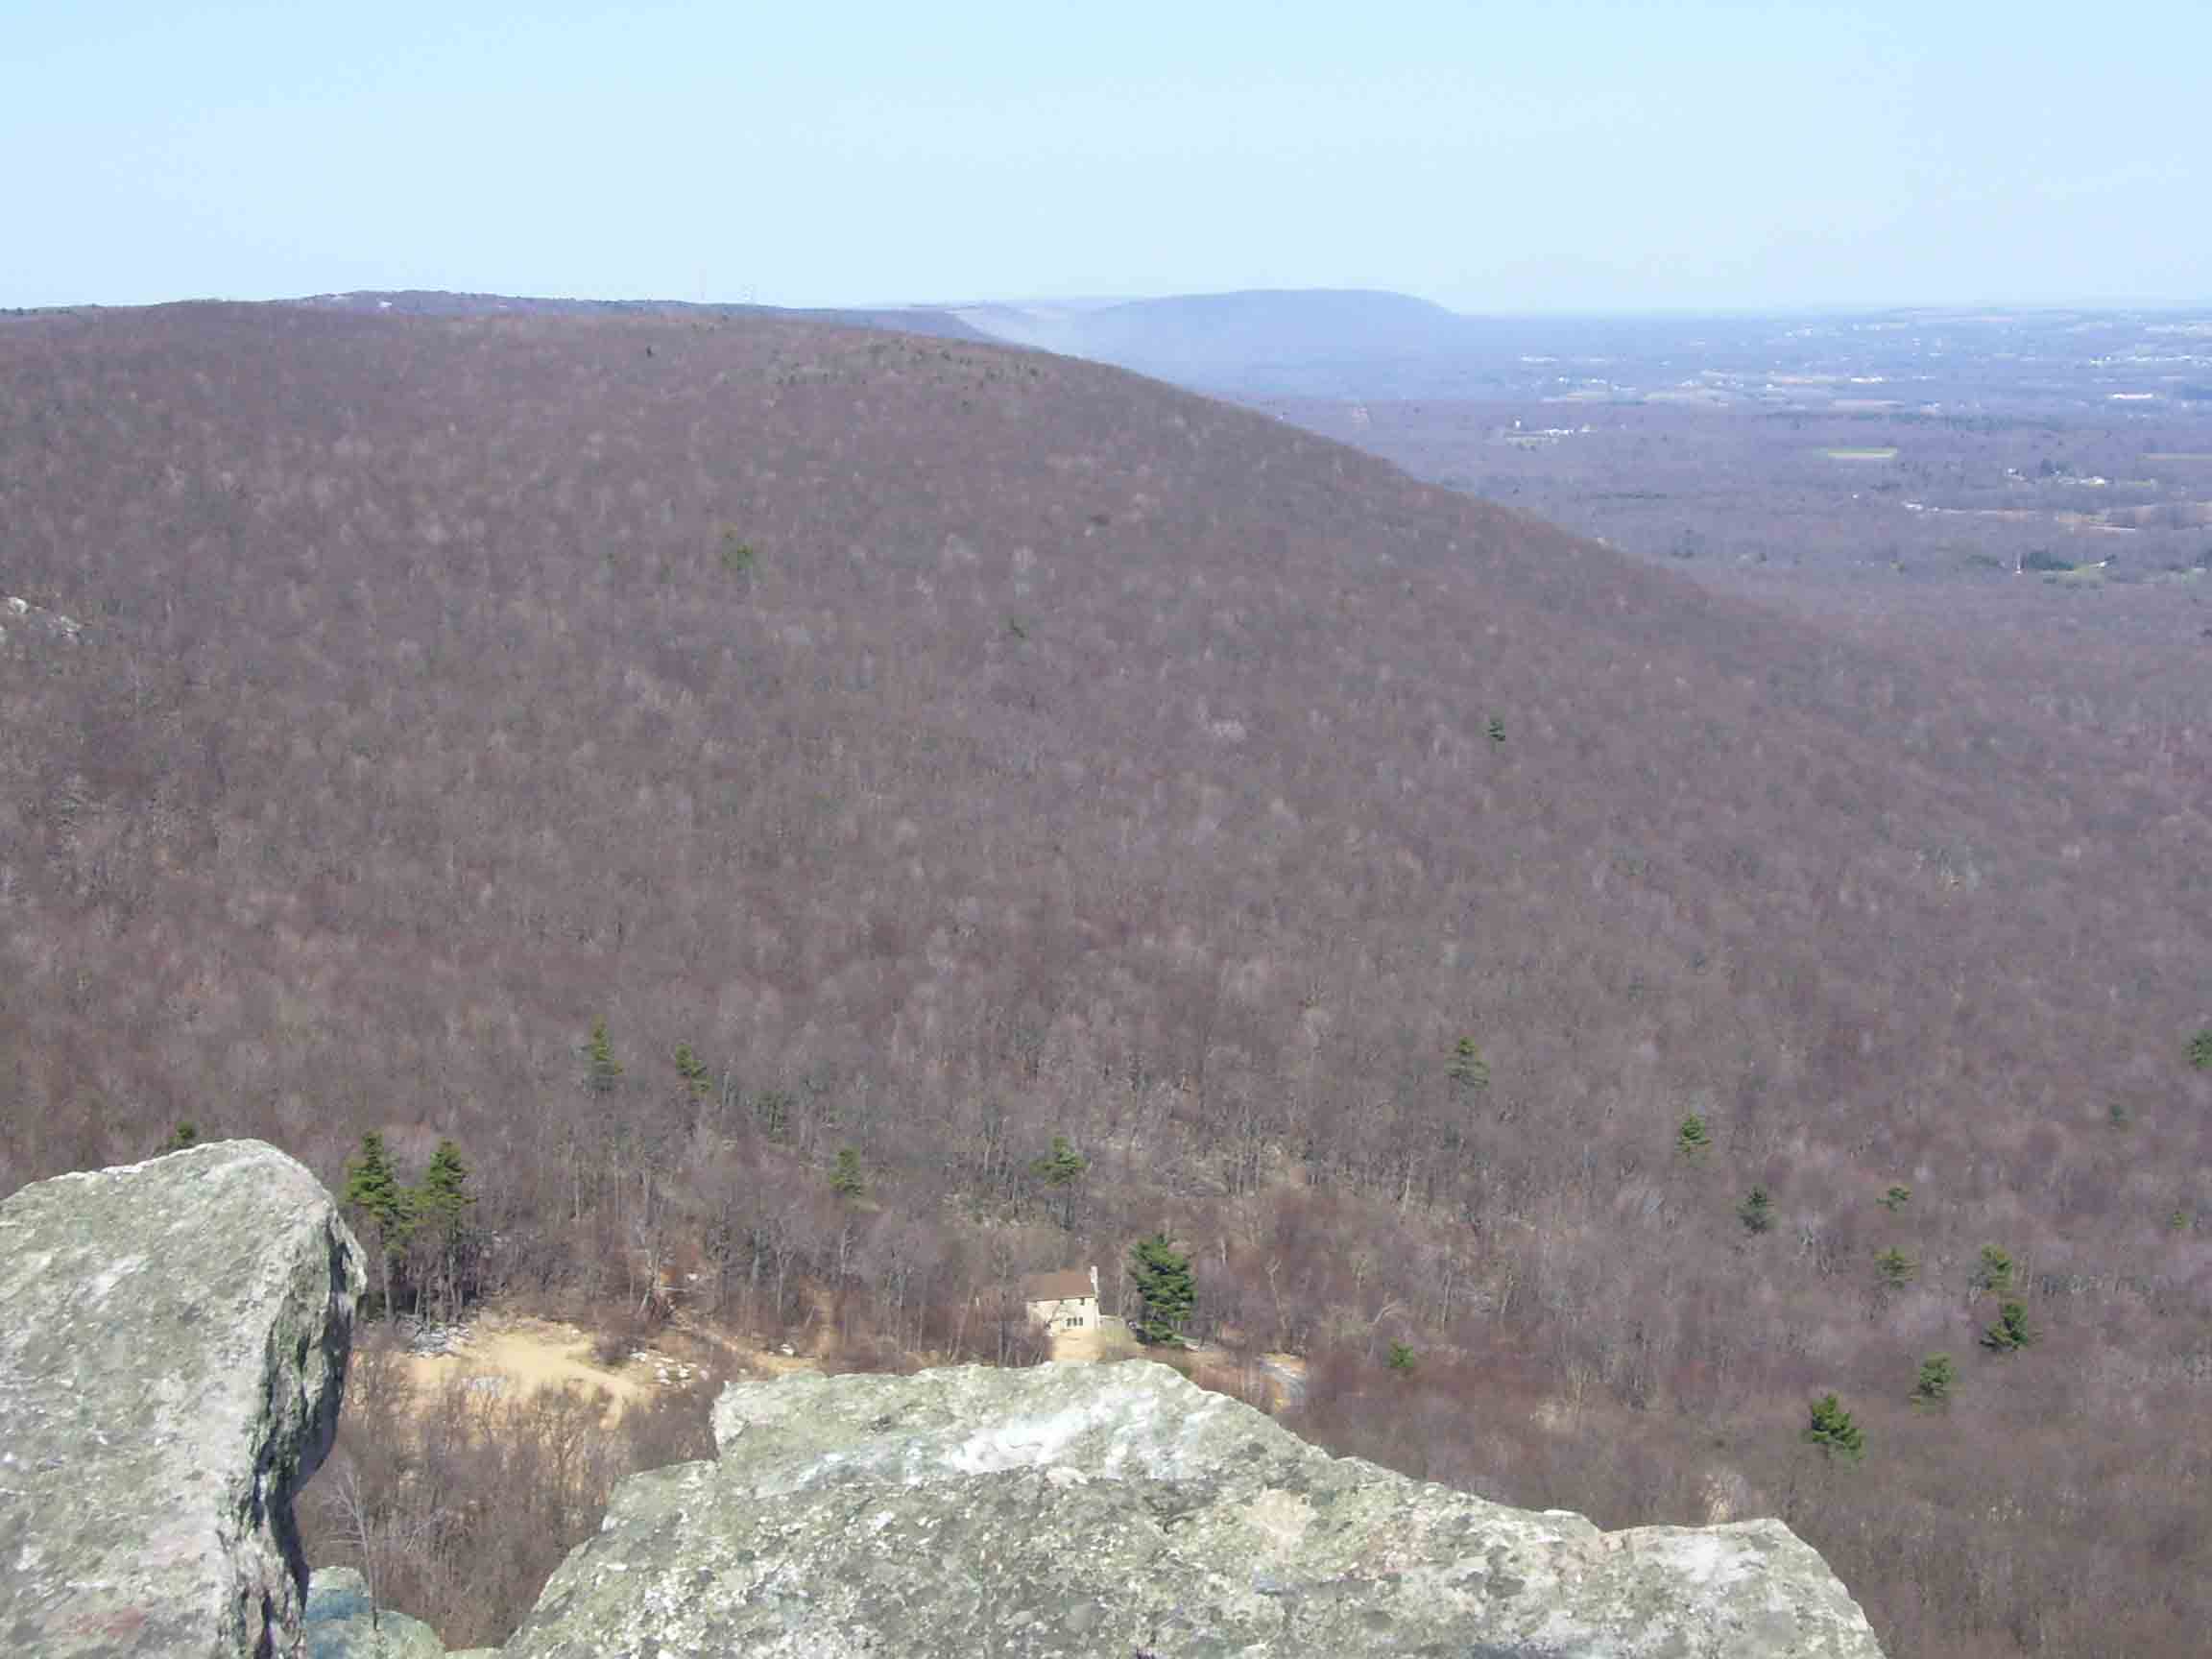 mm 8.0 - View to east from Bake Oven Knob. This shows some of the ridge which the trail follows east (trail north). Courtesy dlcul@conncoll.edu